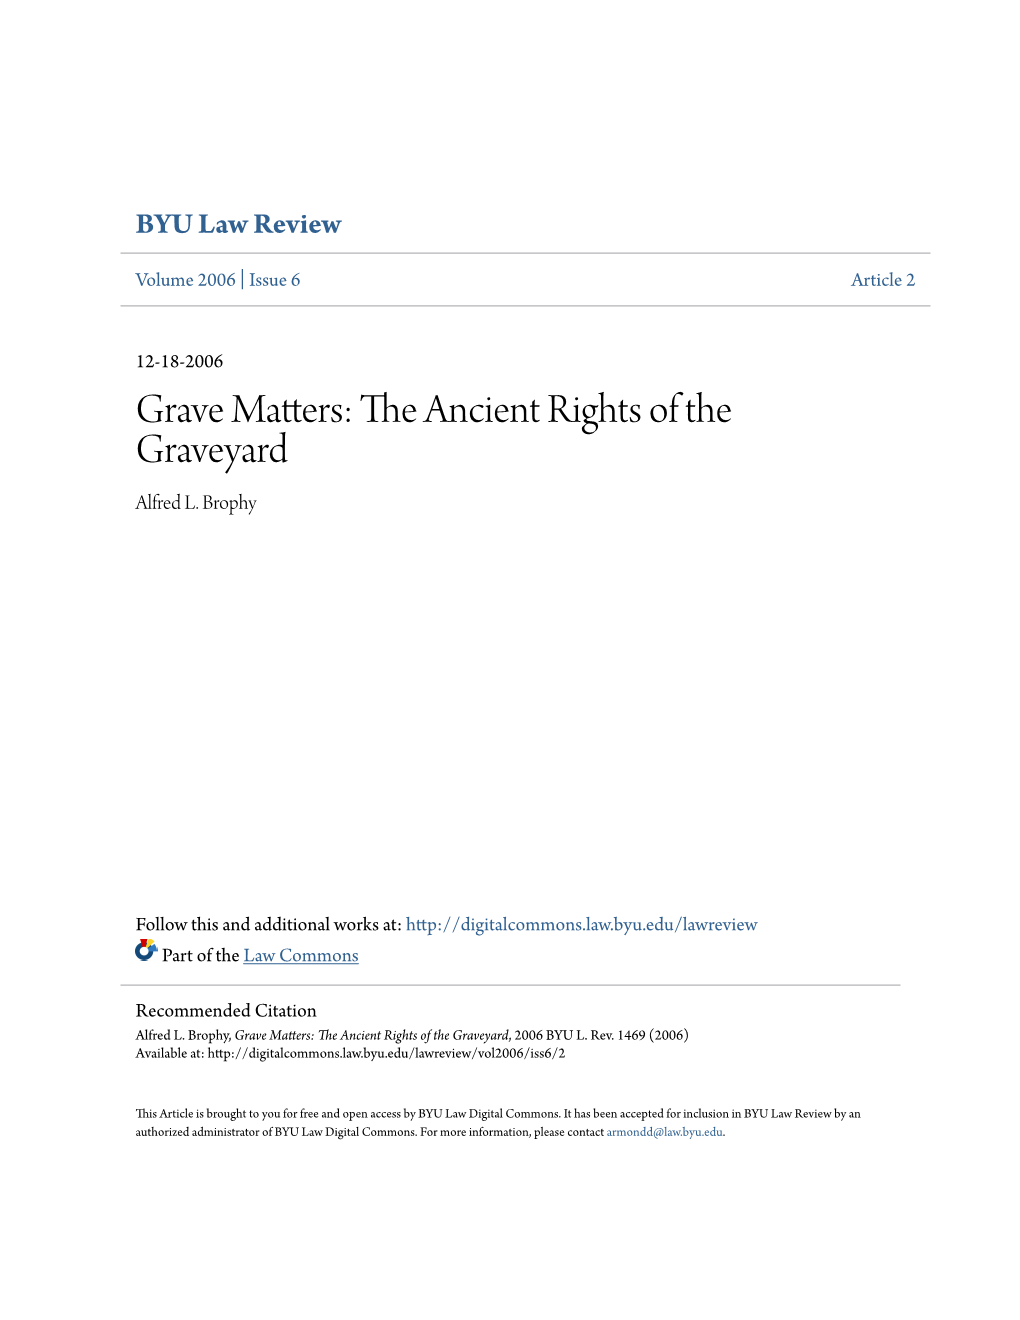 Grave Matters: the Ancient Rights of the Graveyard Alfred L